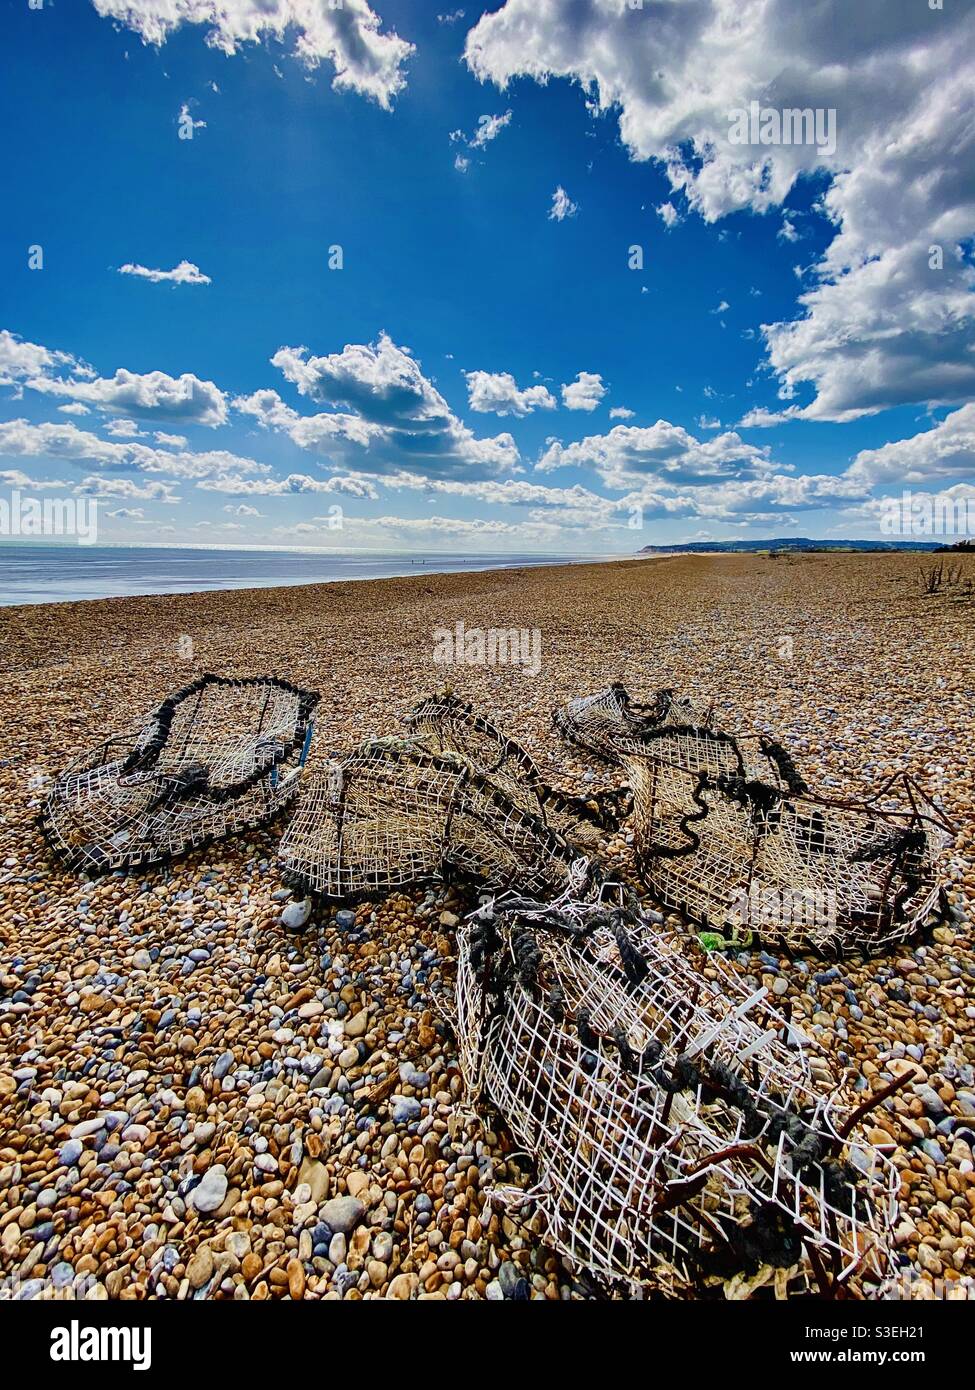 Lobster pots washed-up on Winchelsea beach near Pett Level, Kent, England. Stock Photo